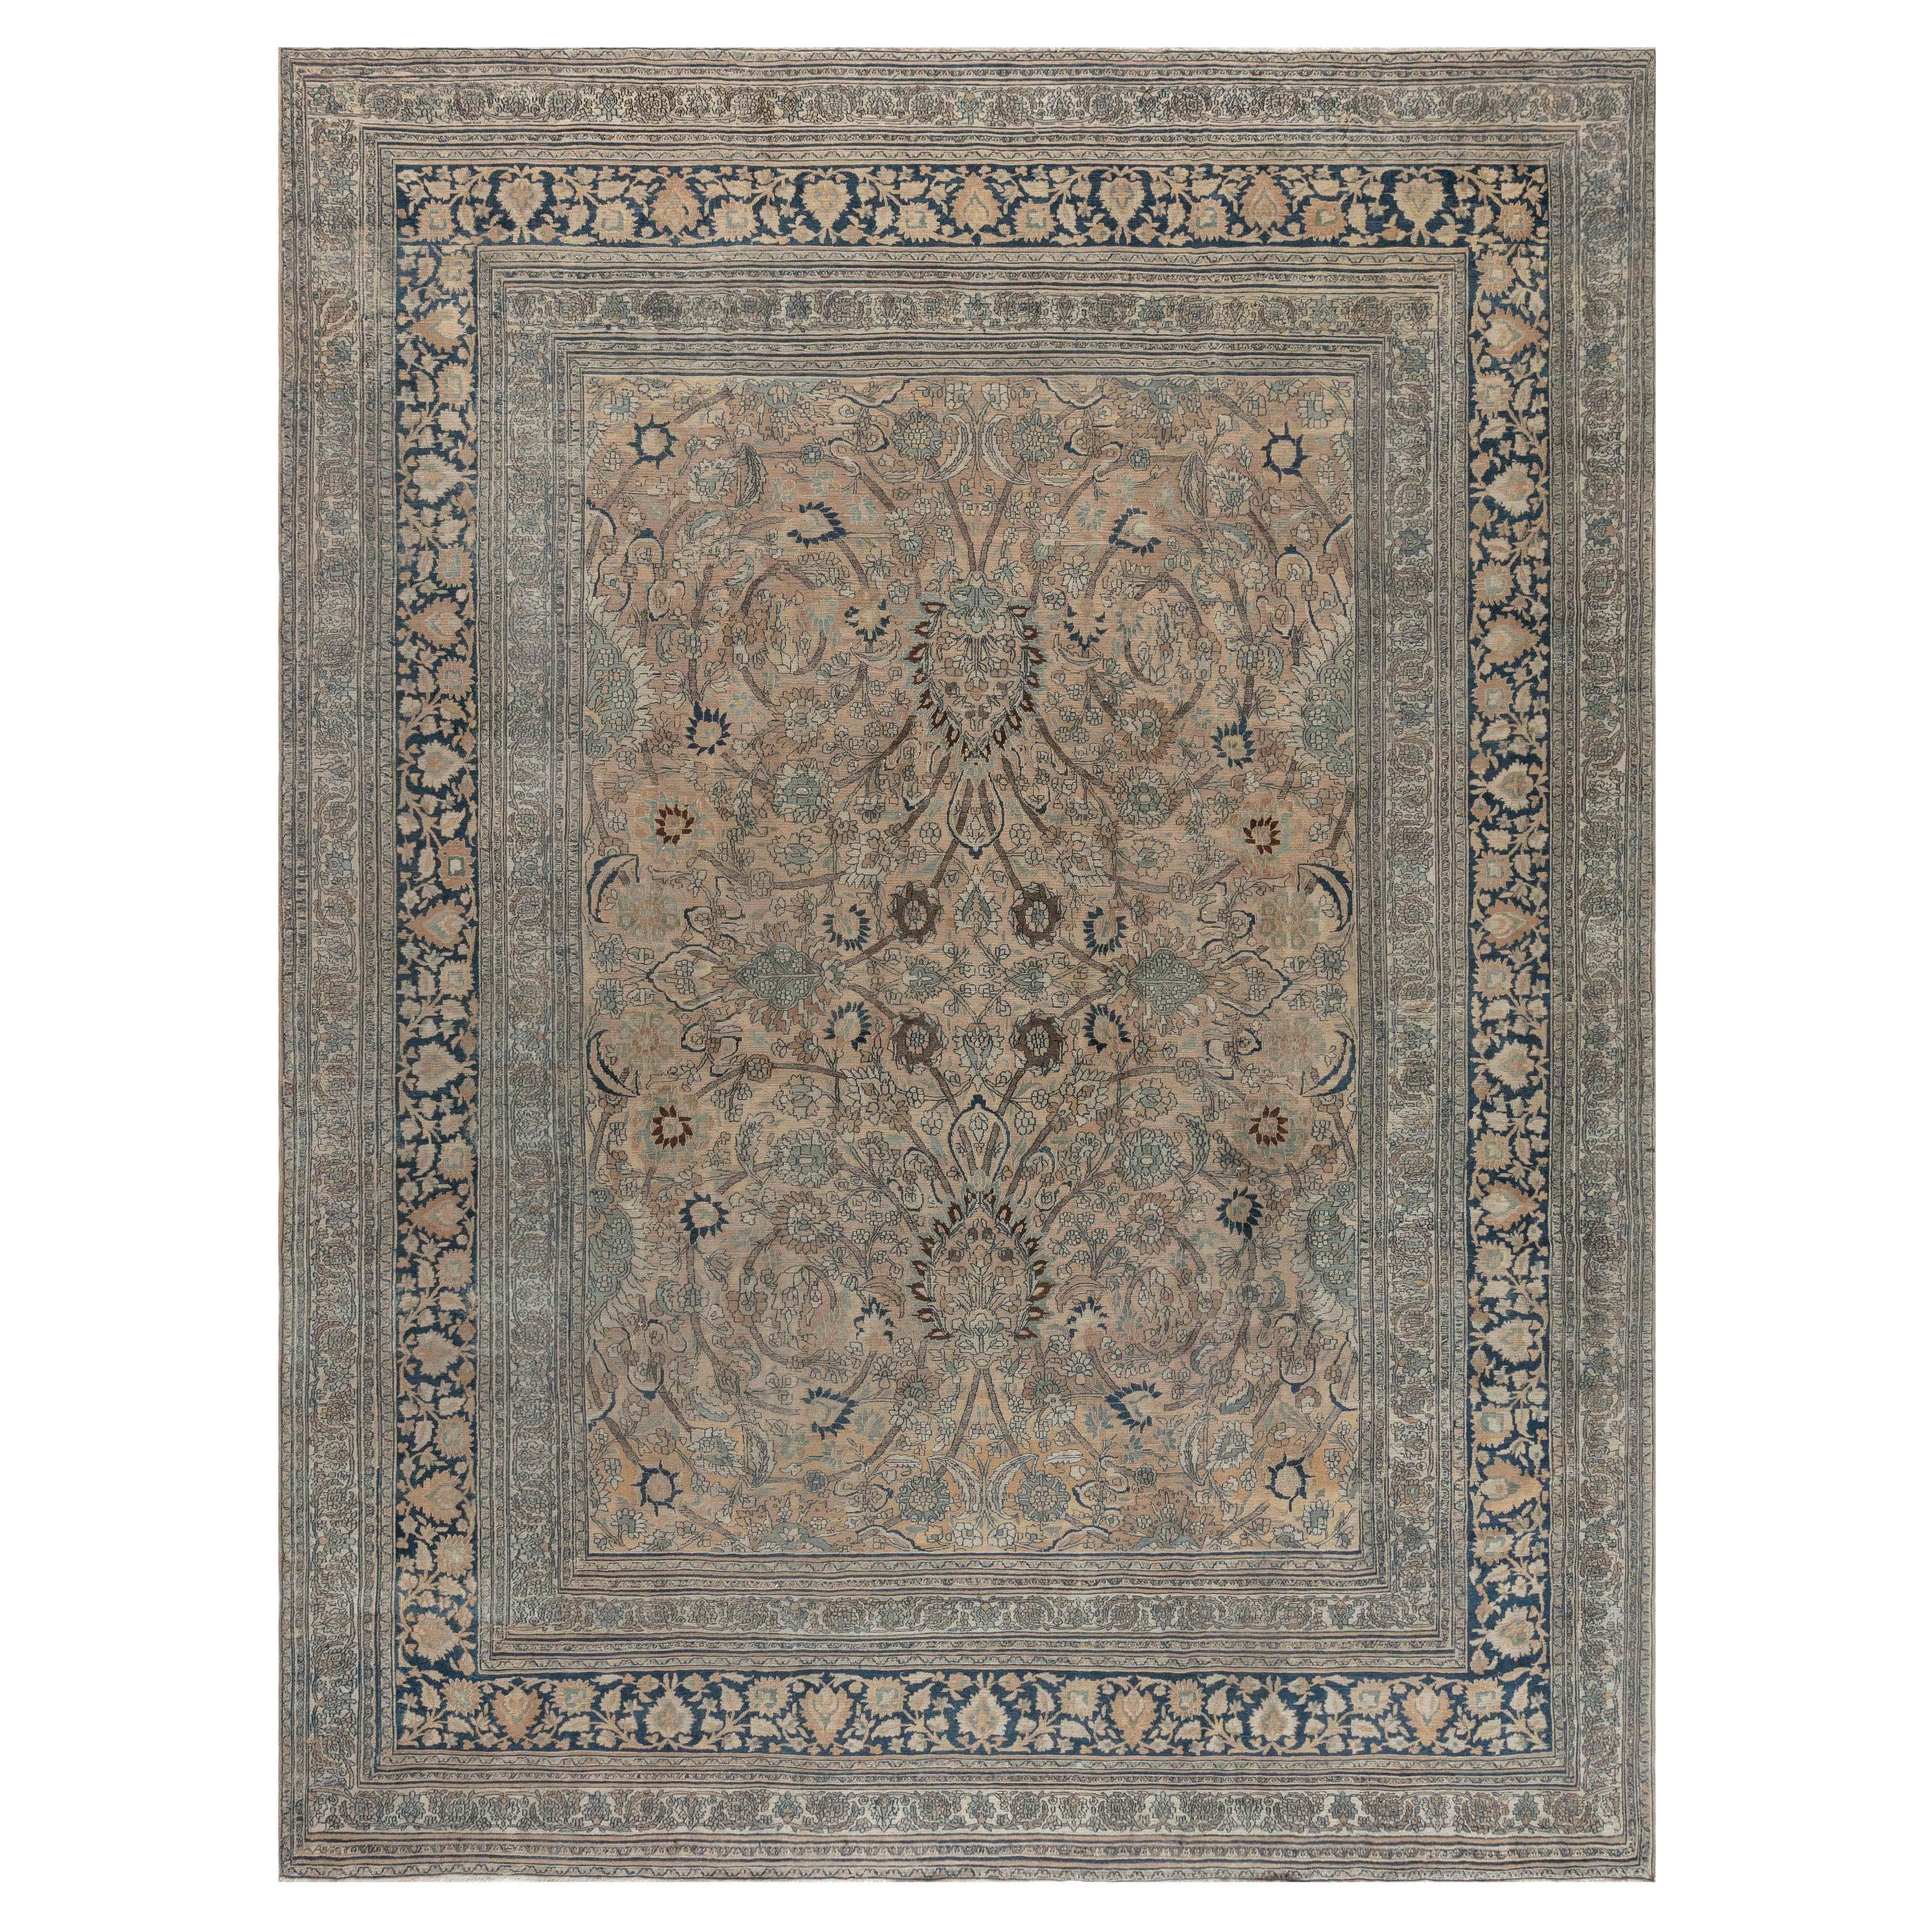 Authentic 19th Century Persian Meshad Handmade Wool Carpet For Sale